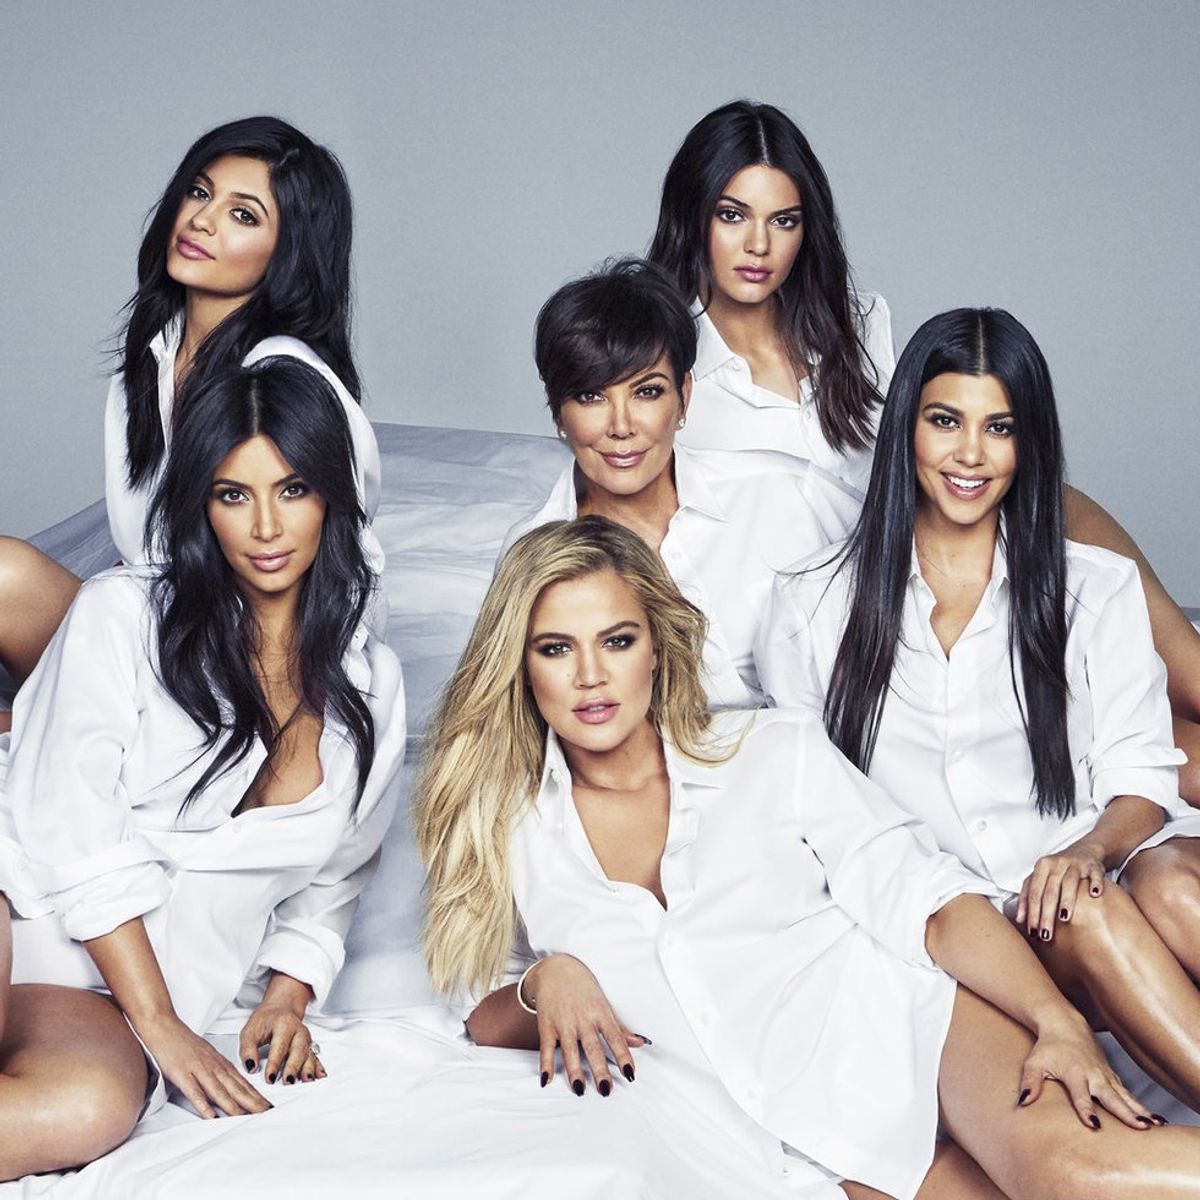 Why I Stopped Watching The Kardashians